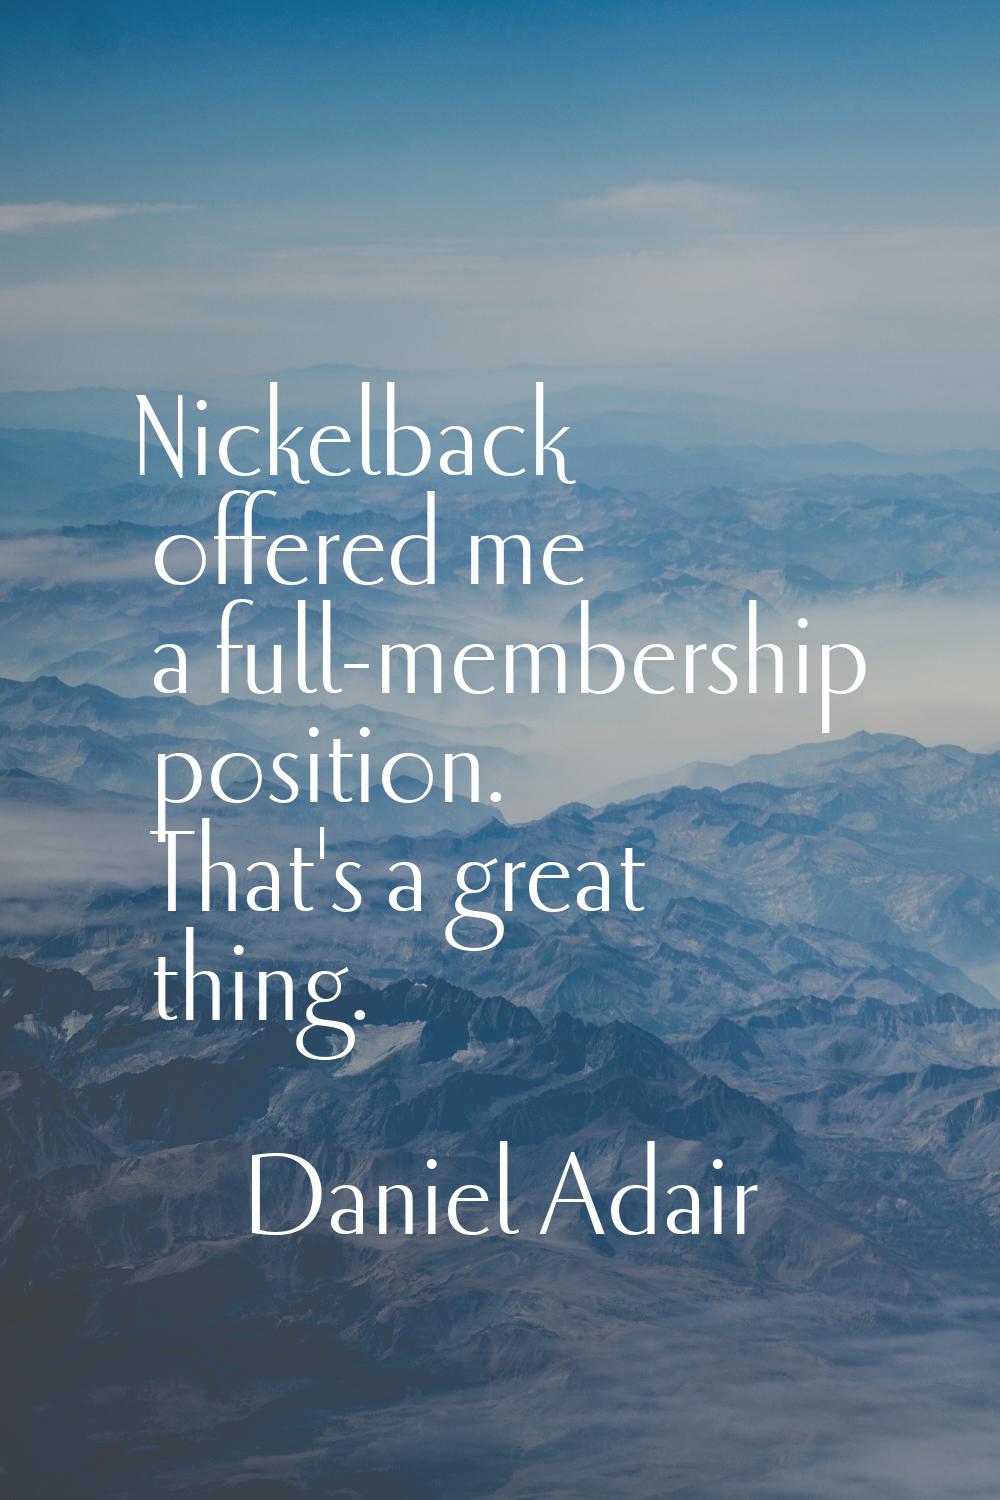 Nickelback offered me a full-membership position. That's a great thing.